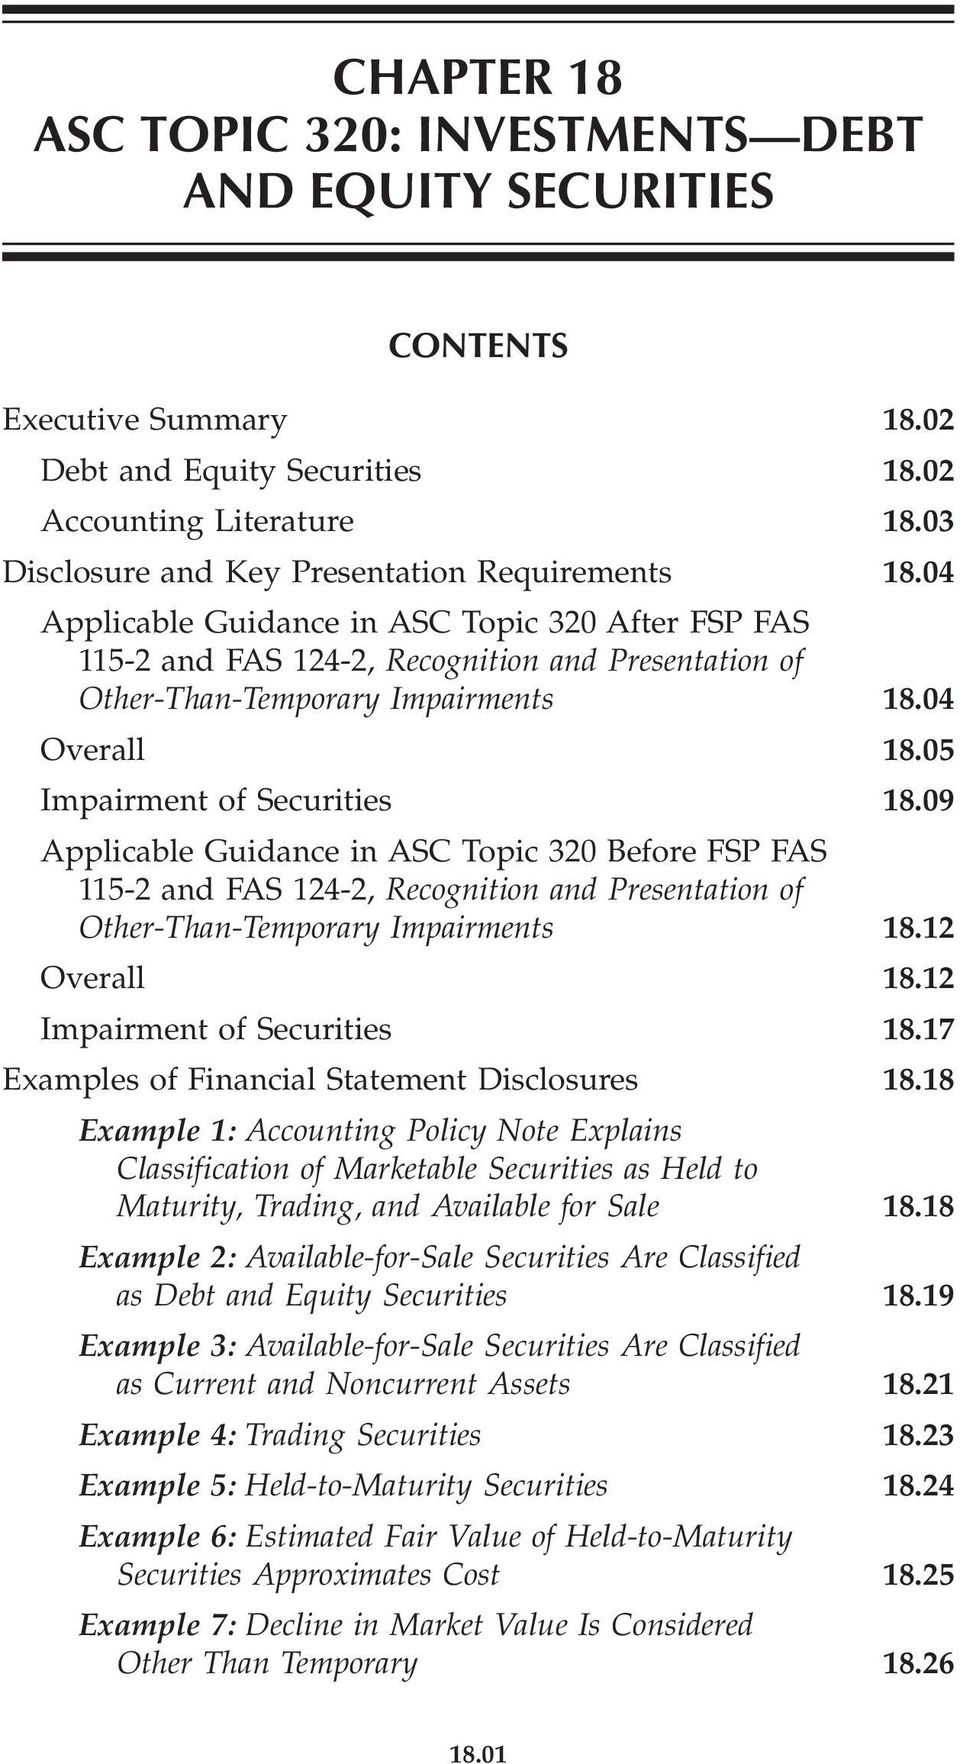 04 Overall 18.05 Impairment of Securities 18.09 Applicable Guidance in ASC Topic 320 Before FSP FAS 115-2 and FAS 124-2, Recognition and Presentation of Other-Than-Temporary Impairments 18.